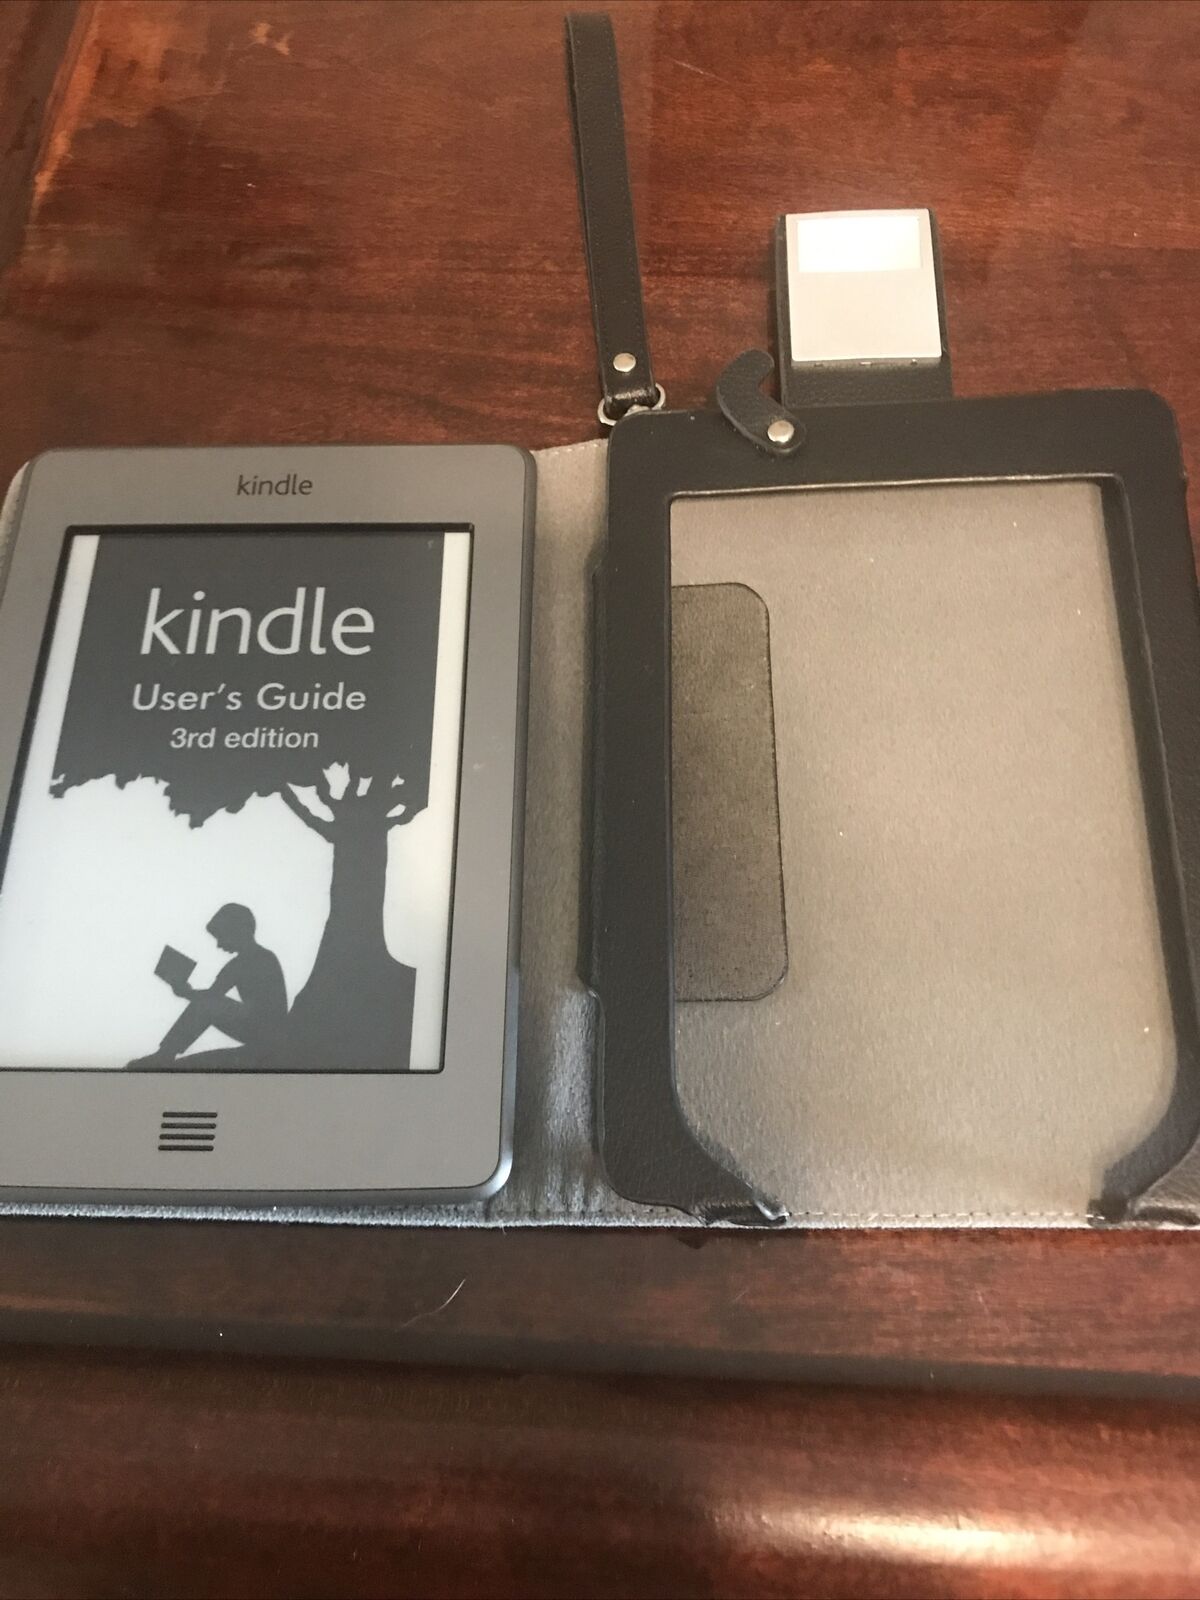 Amazon Kindle Touch (4th Gen) 4GB, Wi-Fi D01200, With Case And Light. Amazon D01200